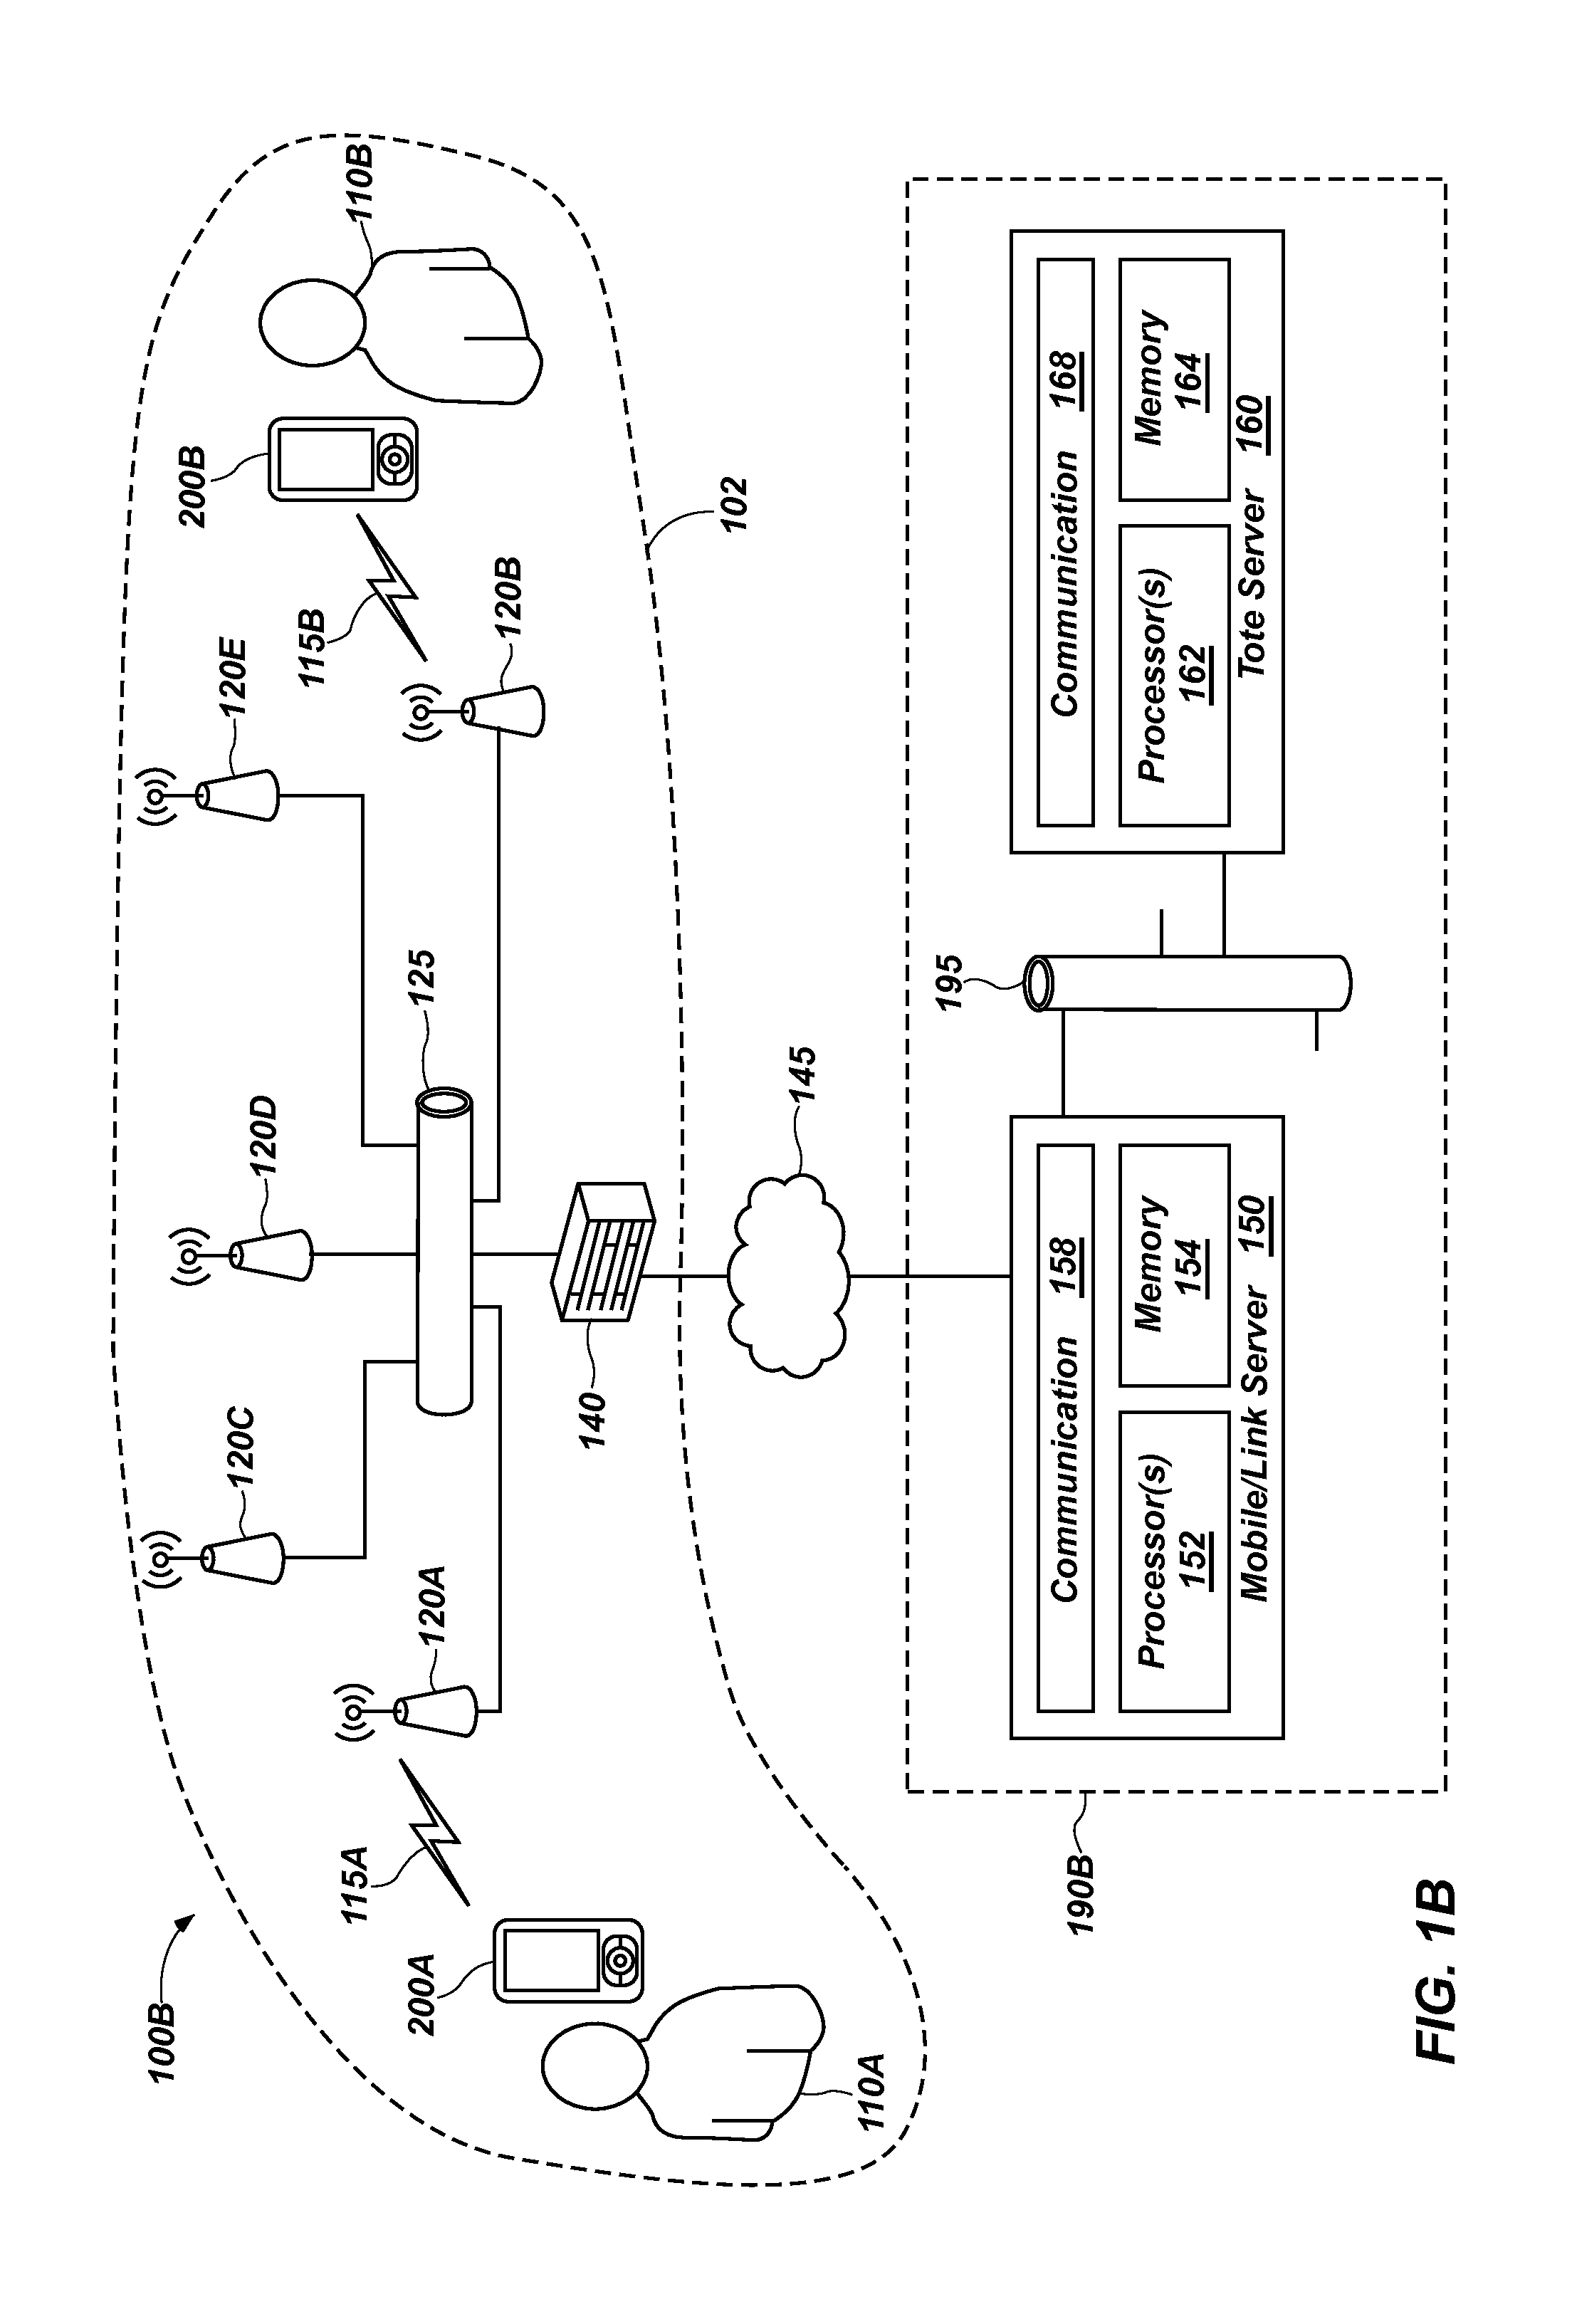 Methods, apparatuses, and systems for on-premises wagering from mobile devices